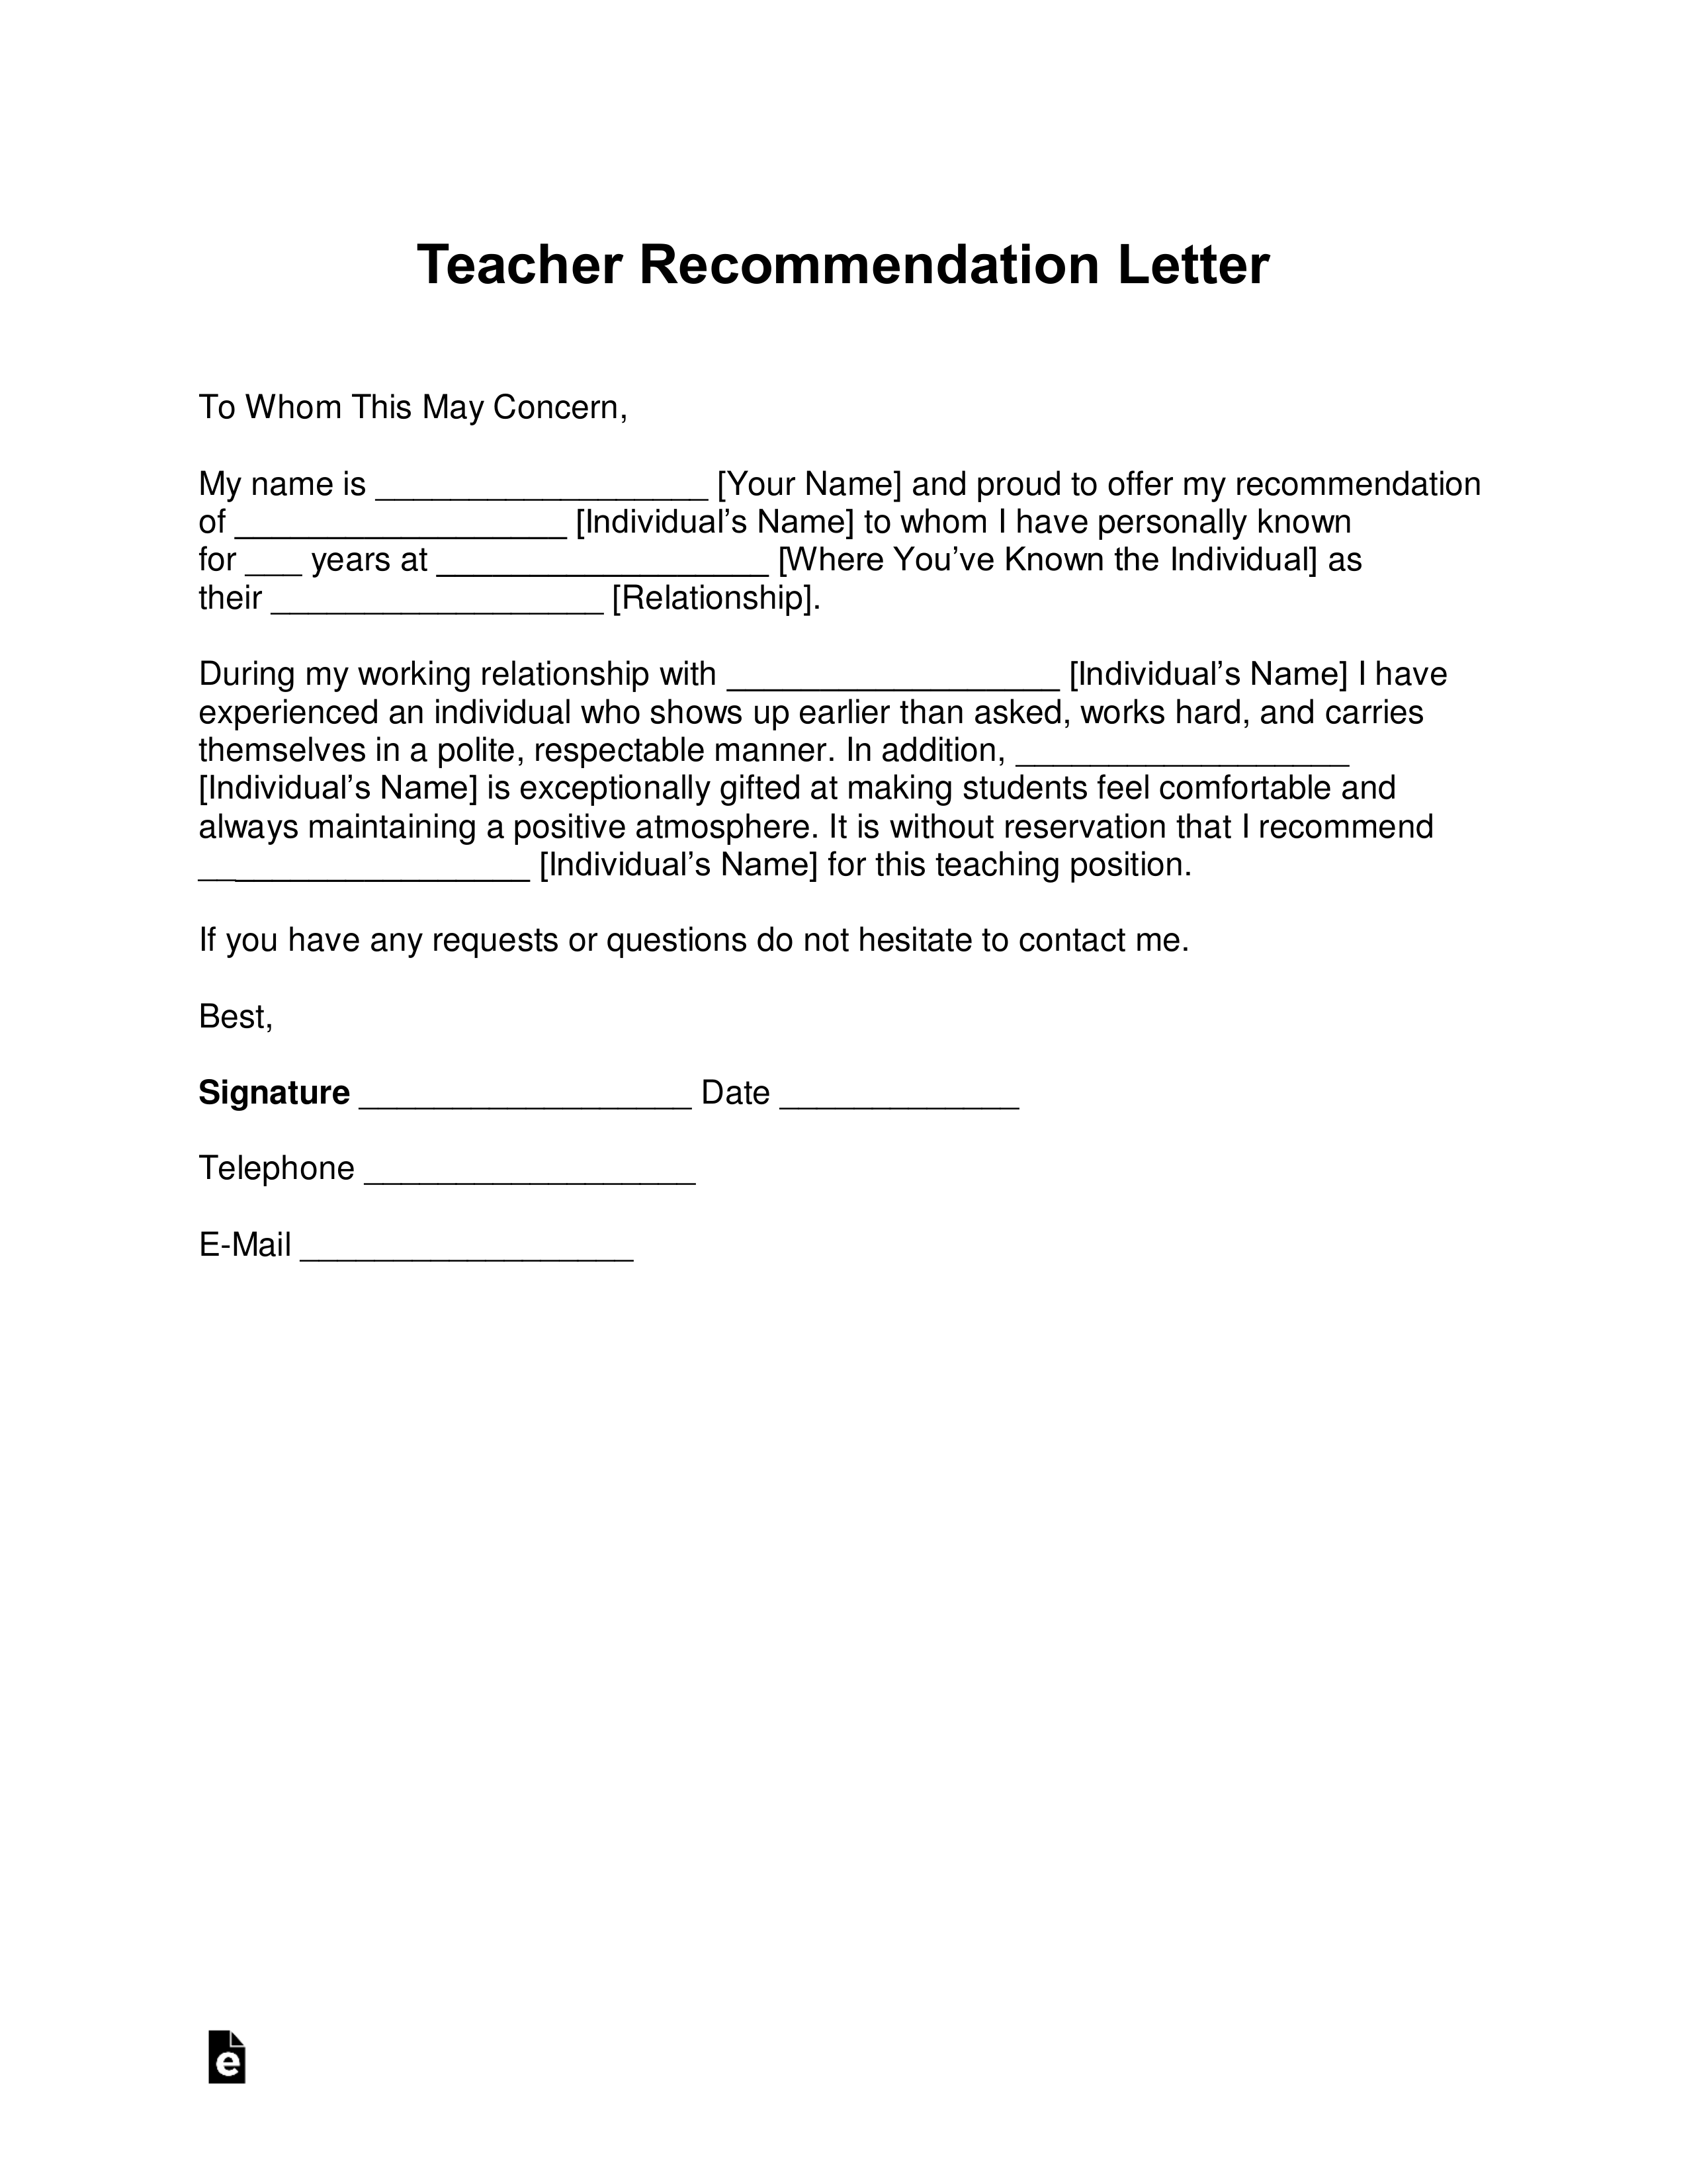 Sample Recommendation Letter For Coworker Teacher from eforms.com